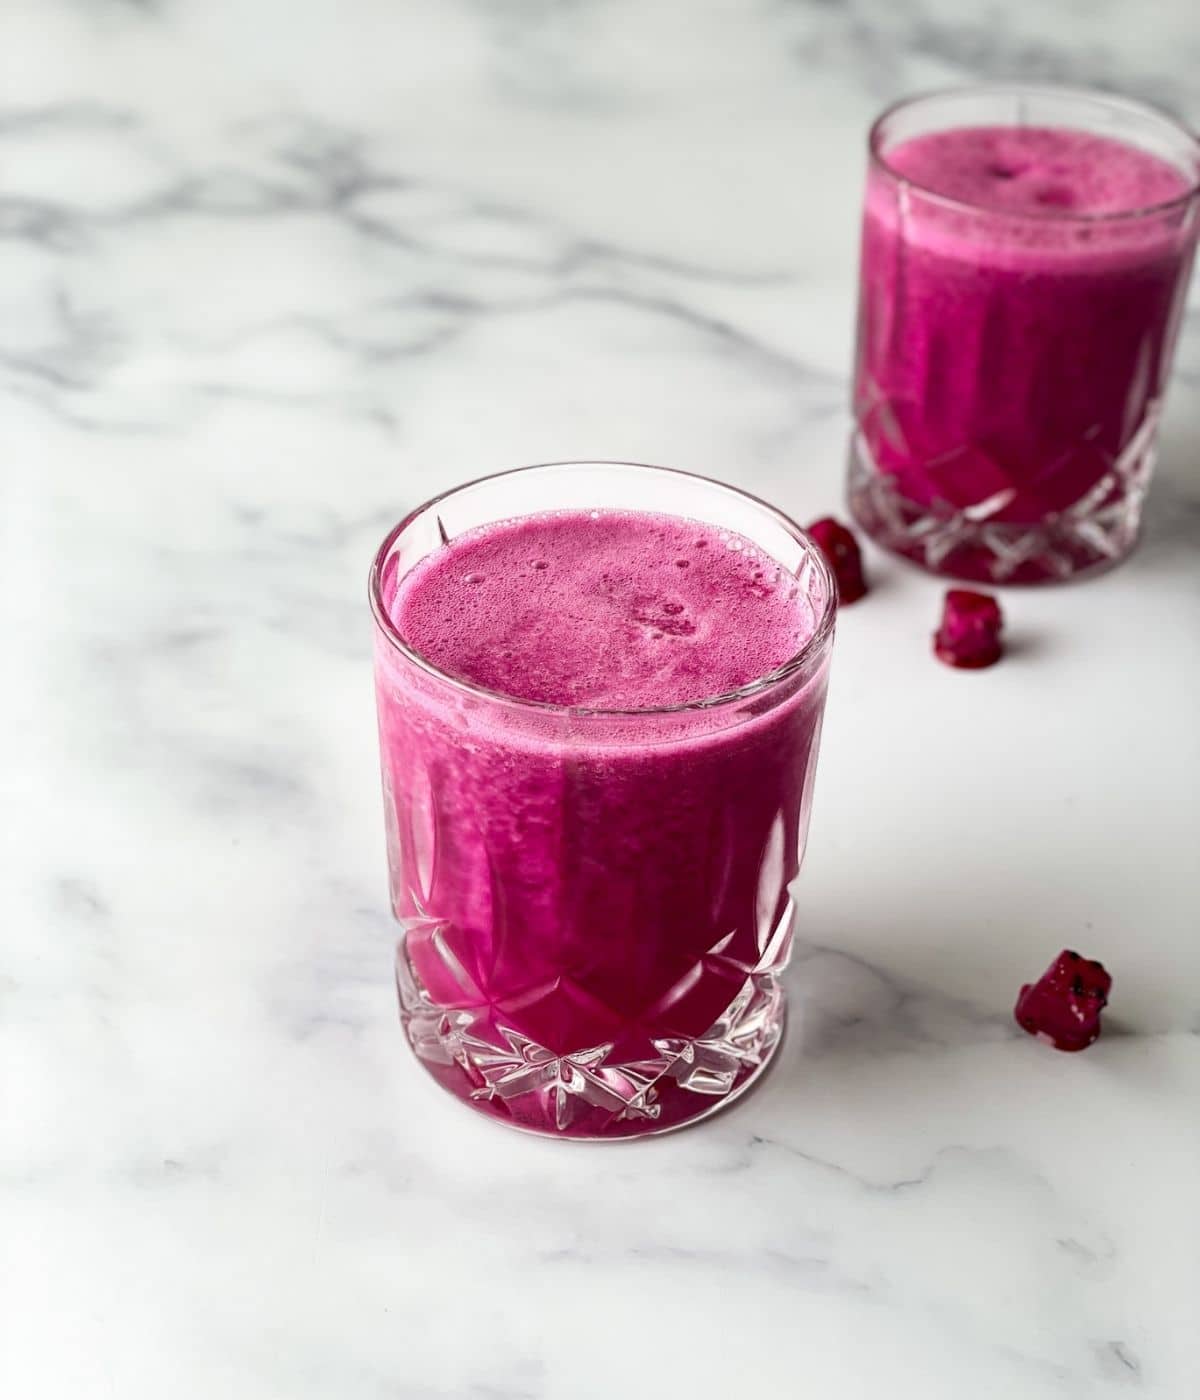 A glass of dragon fruit juice is placed on the white surface.